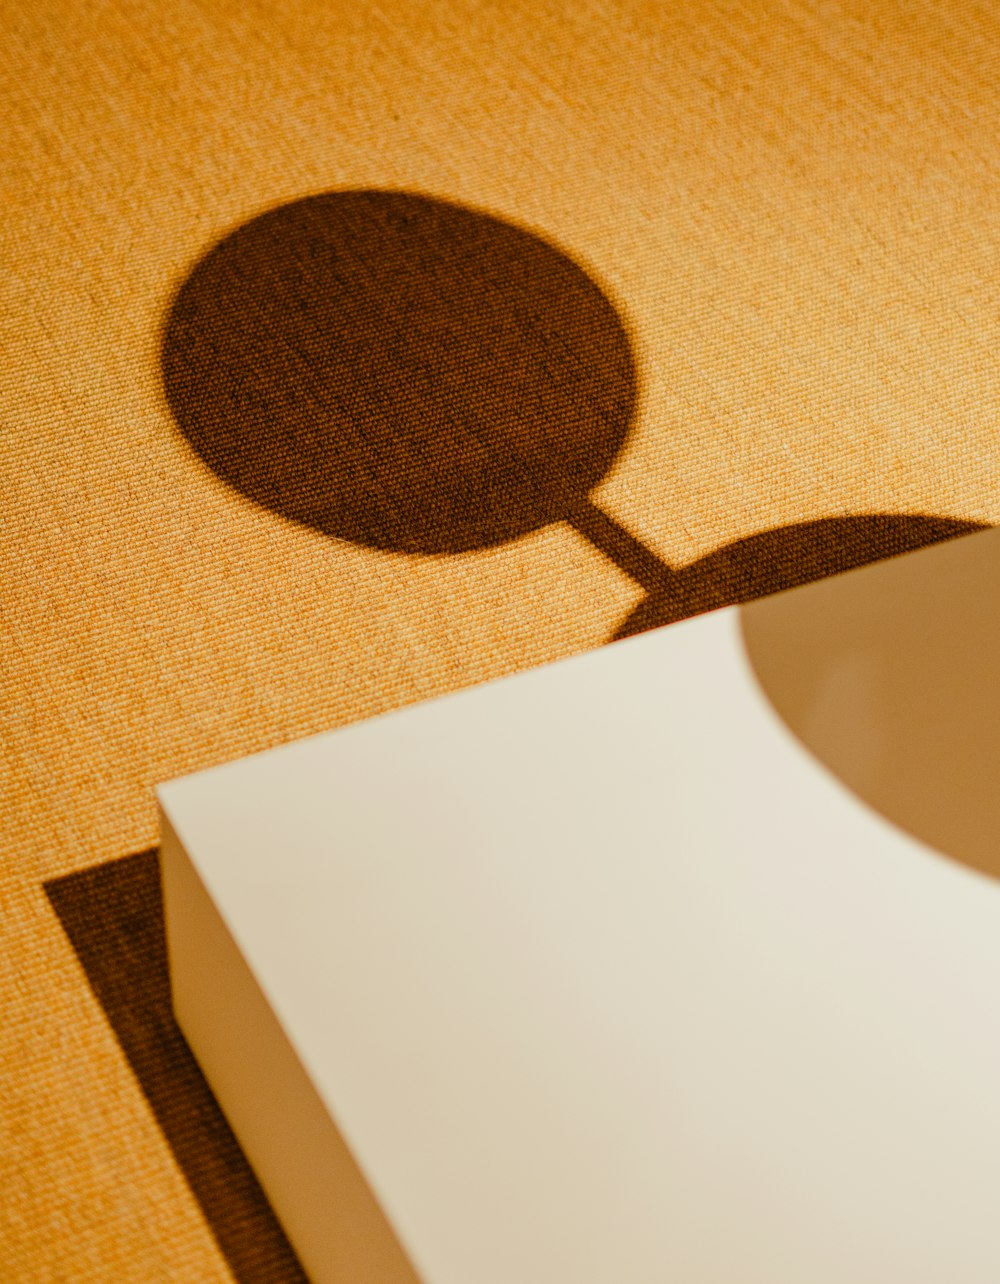 a shadow of a round object on a table